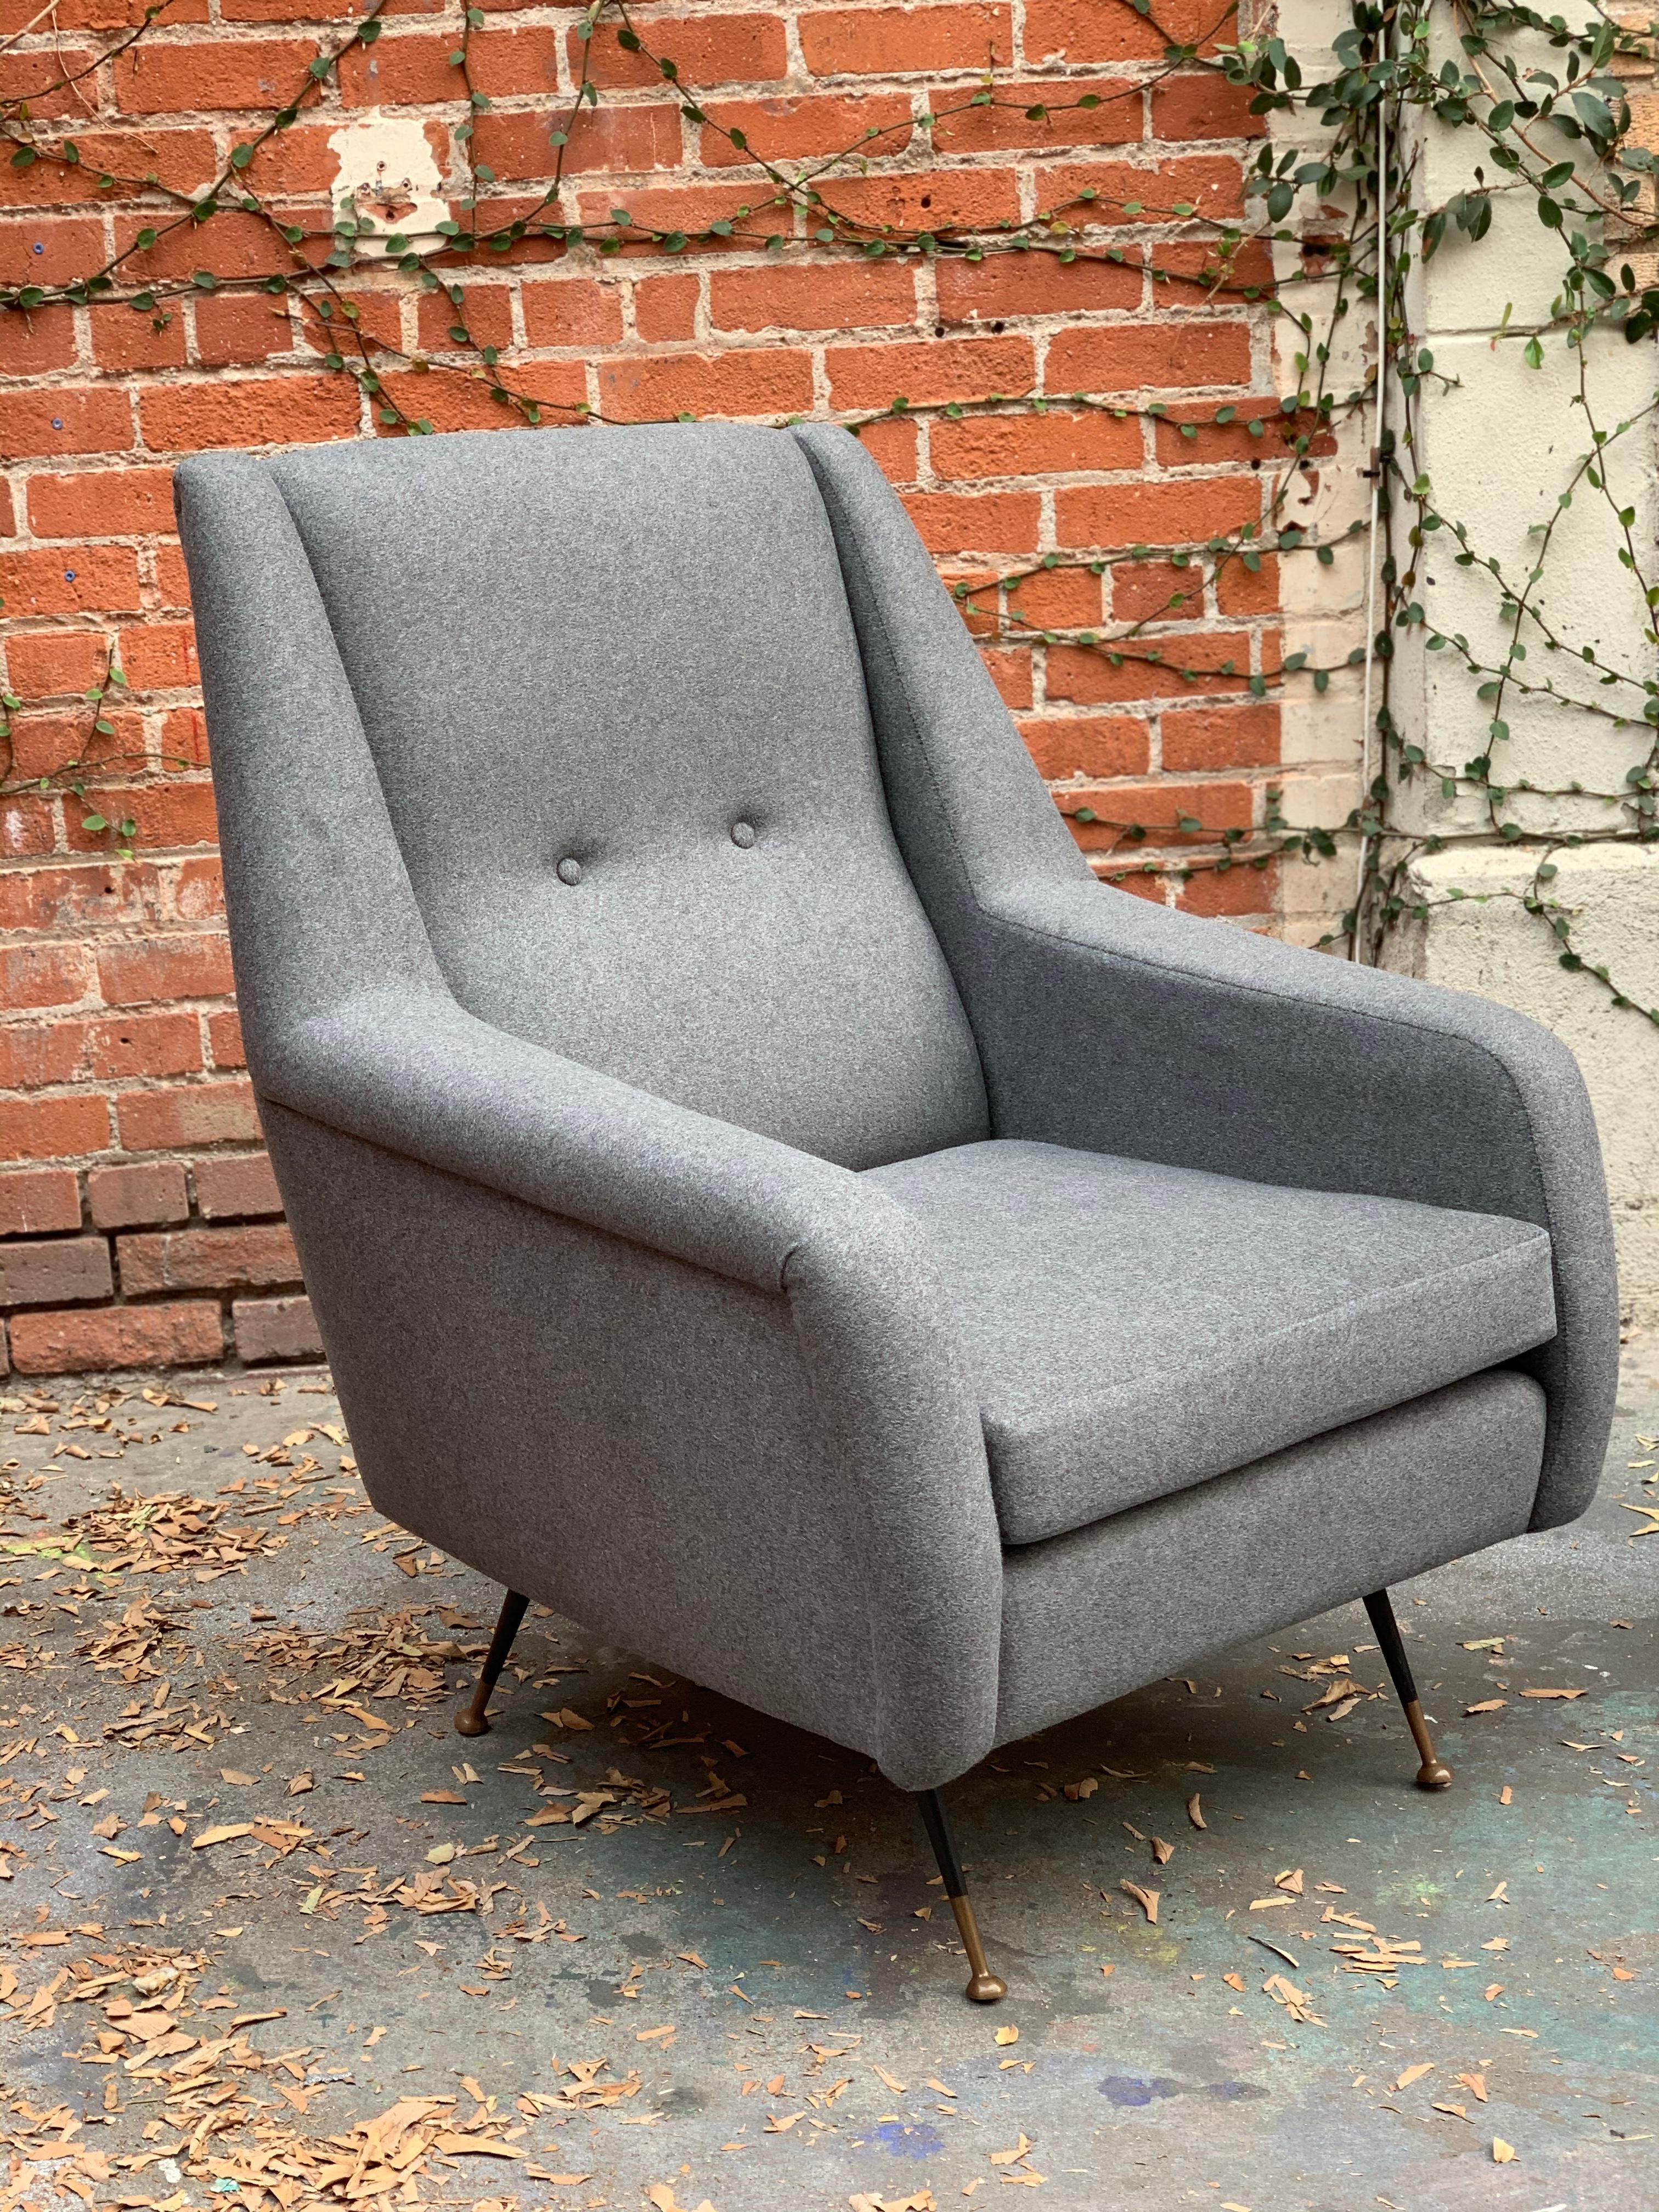 Pair of Italian Midcentury Tufted Chairs by Ico Parisi in Grey Flannel For Sale 1